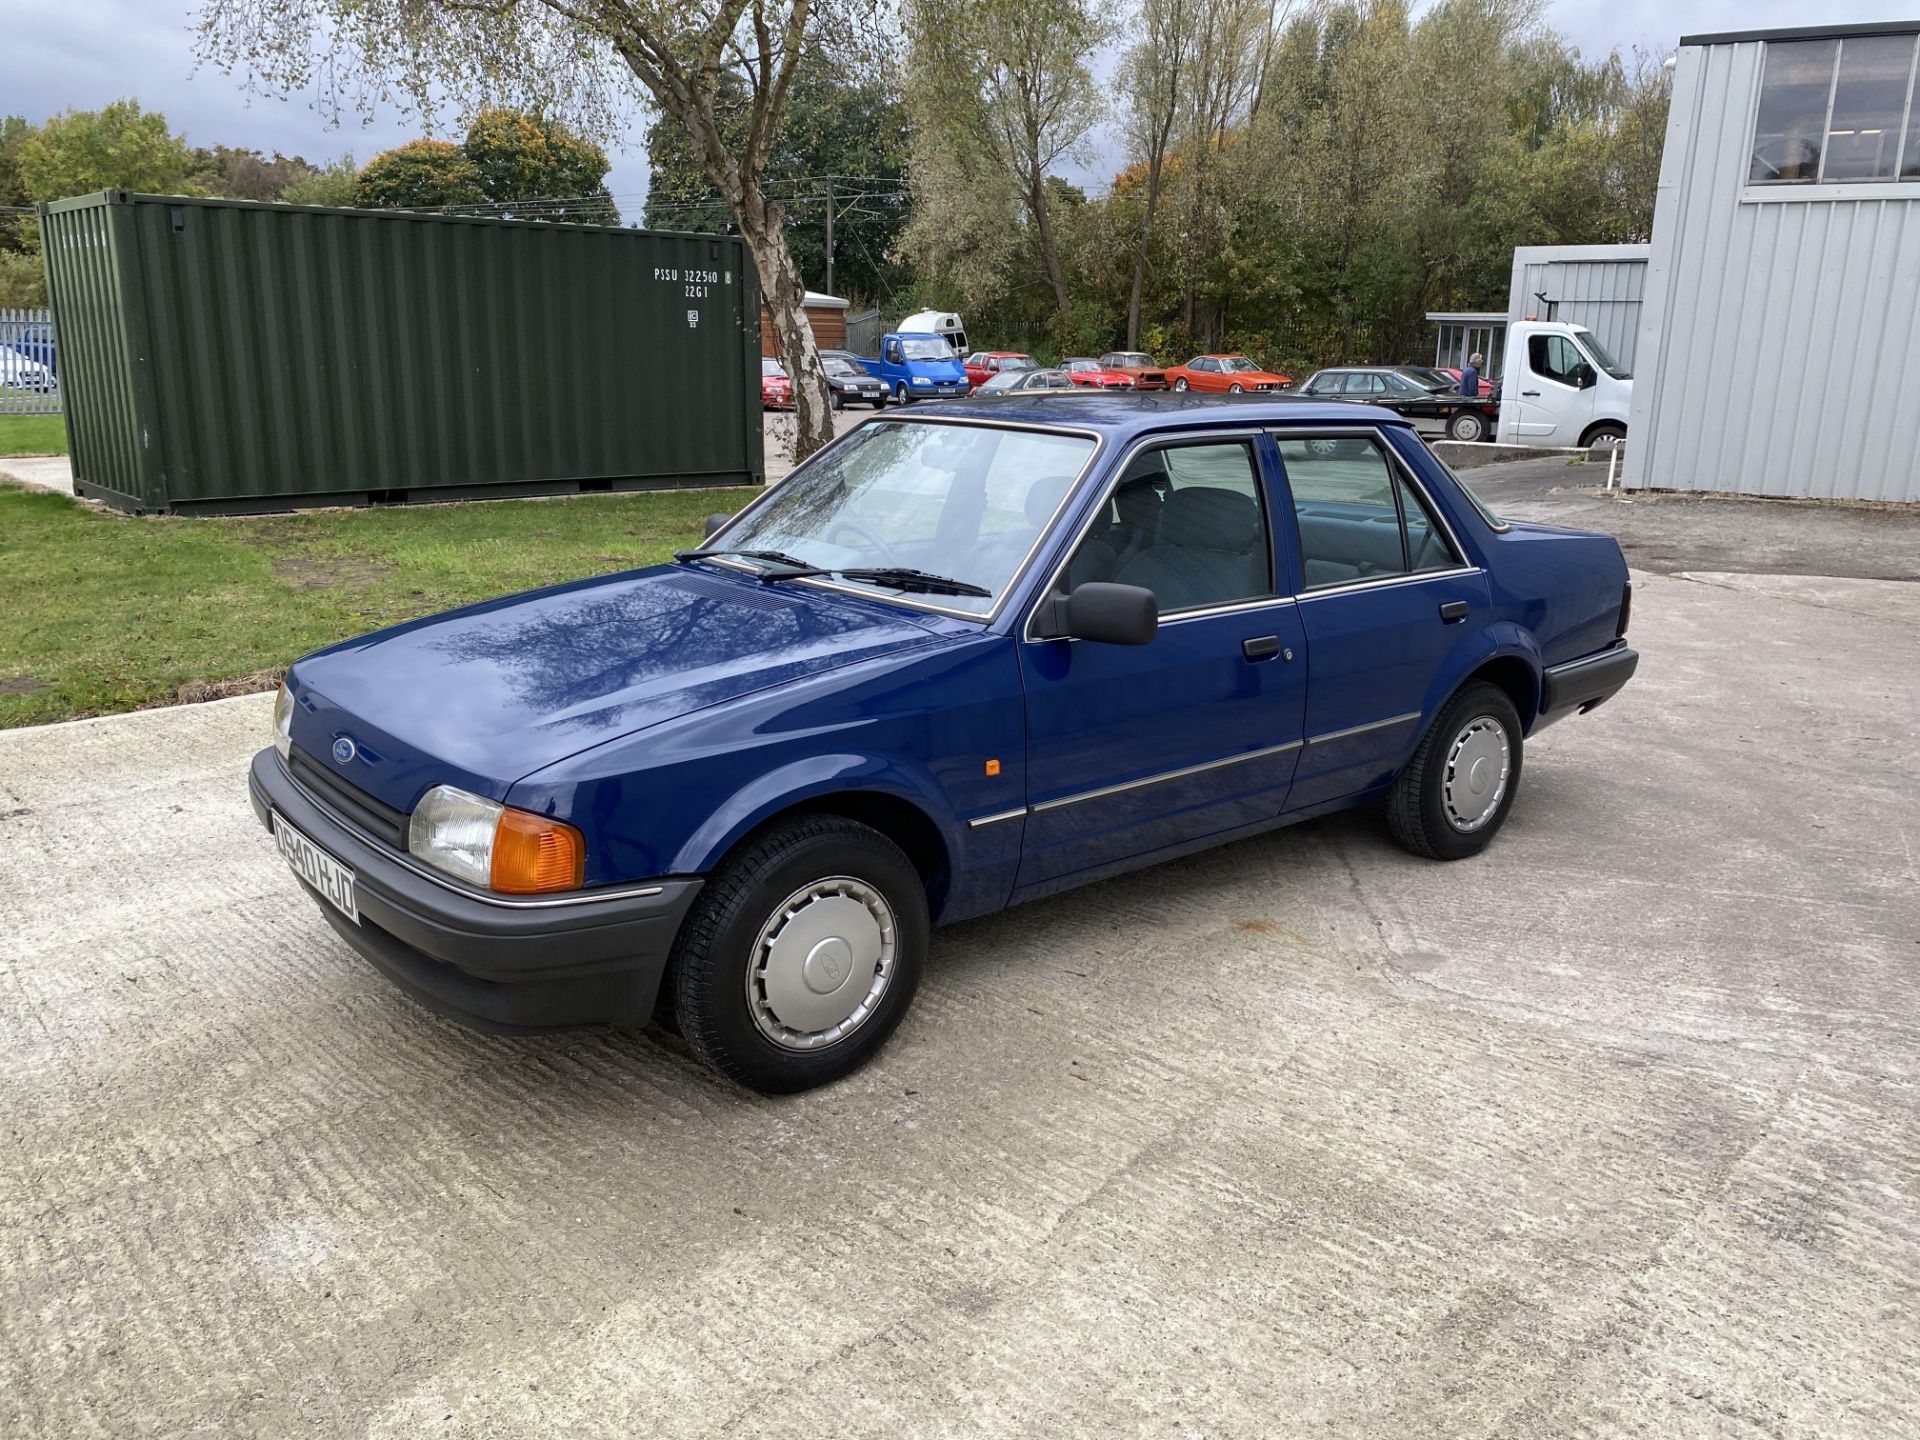 Ford Orion 1.6 GL - Image 8 of 42